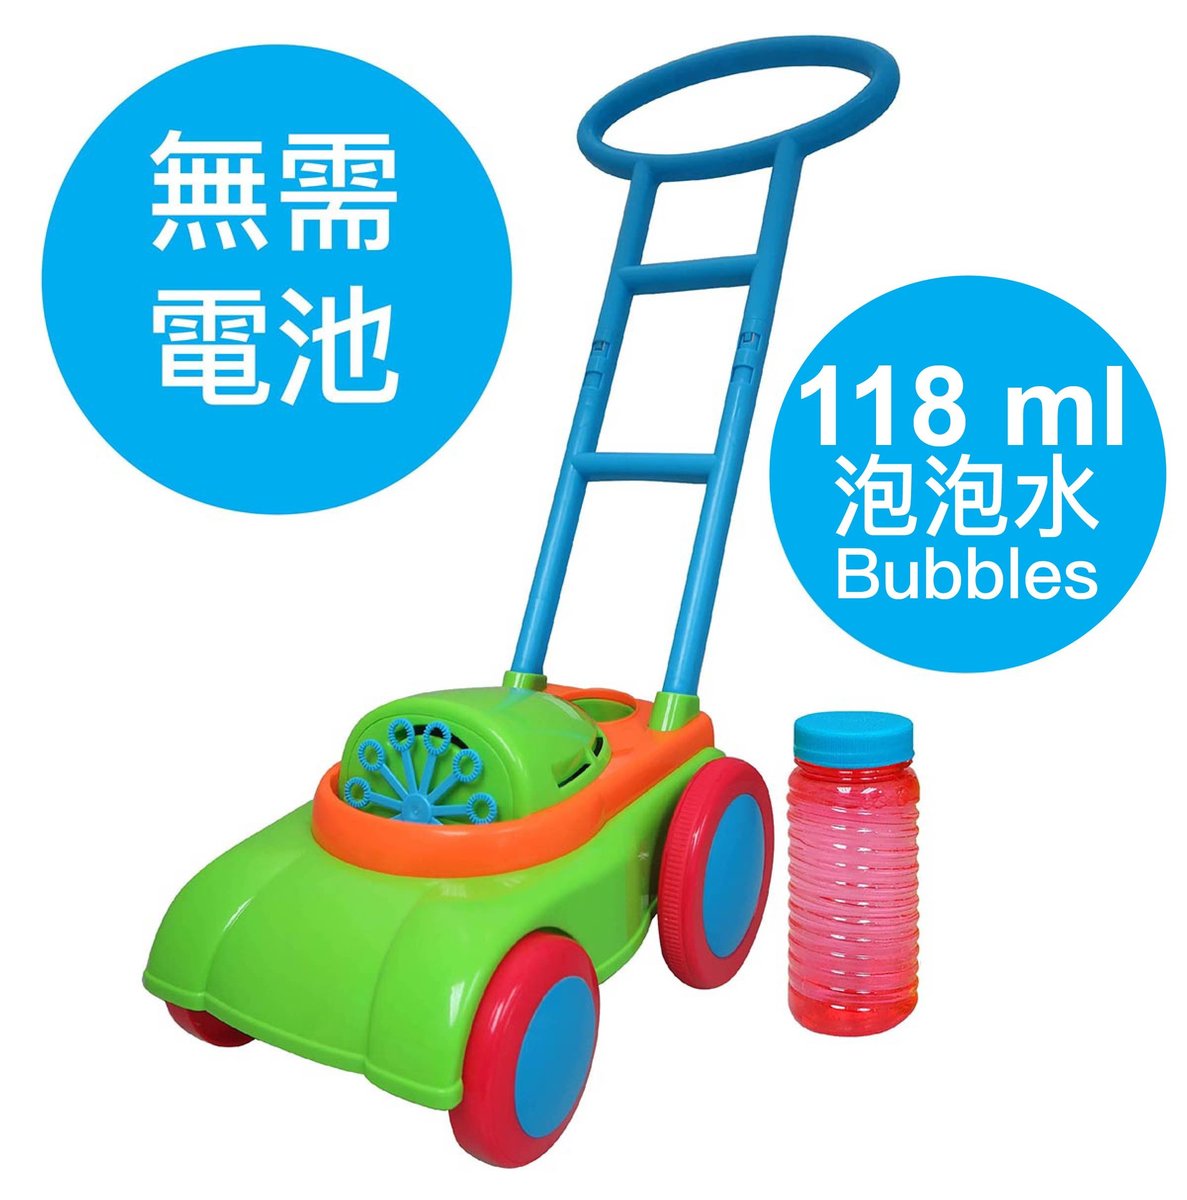 Push Car Bubble Machine - 1 Bubble Solution (118ml) included - Manual (no batteries required)